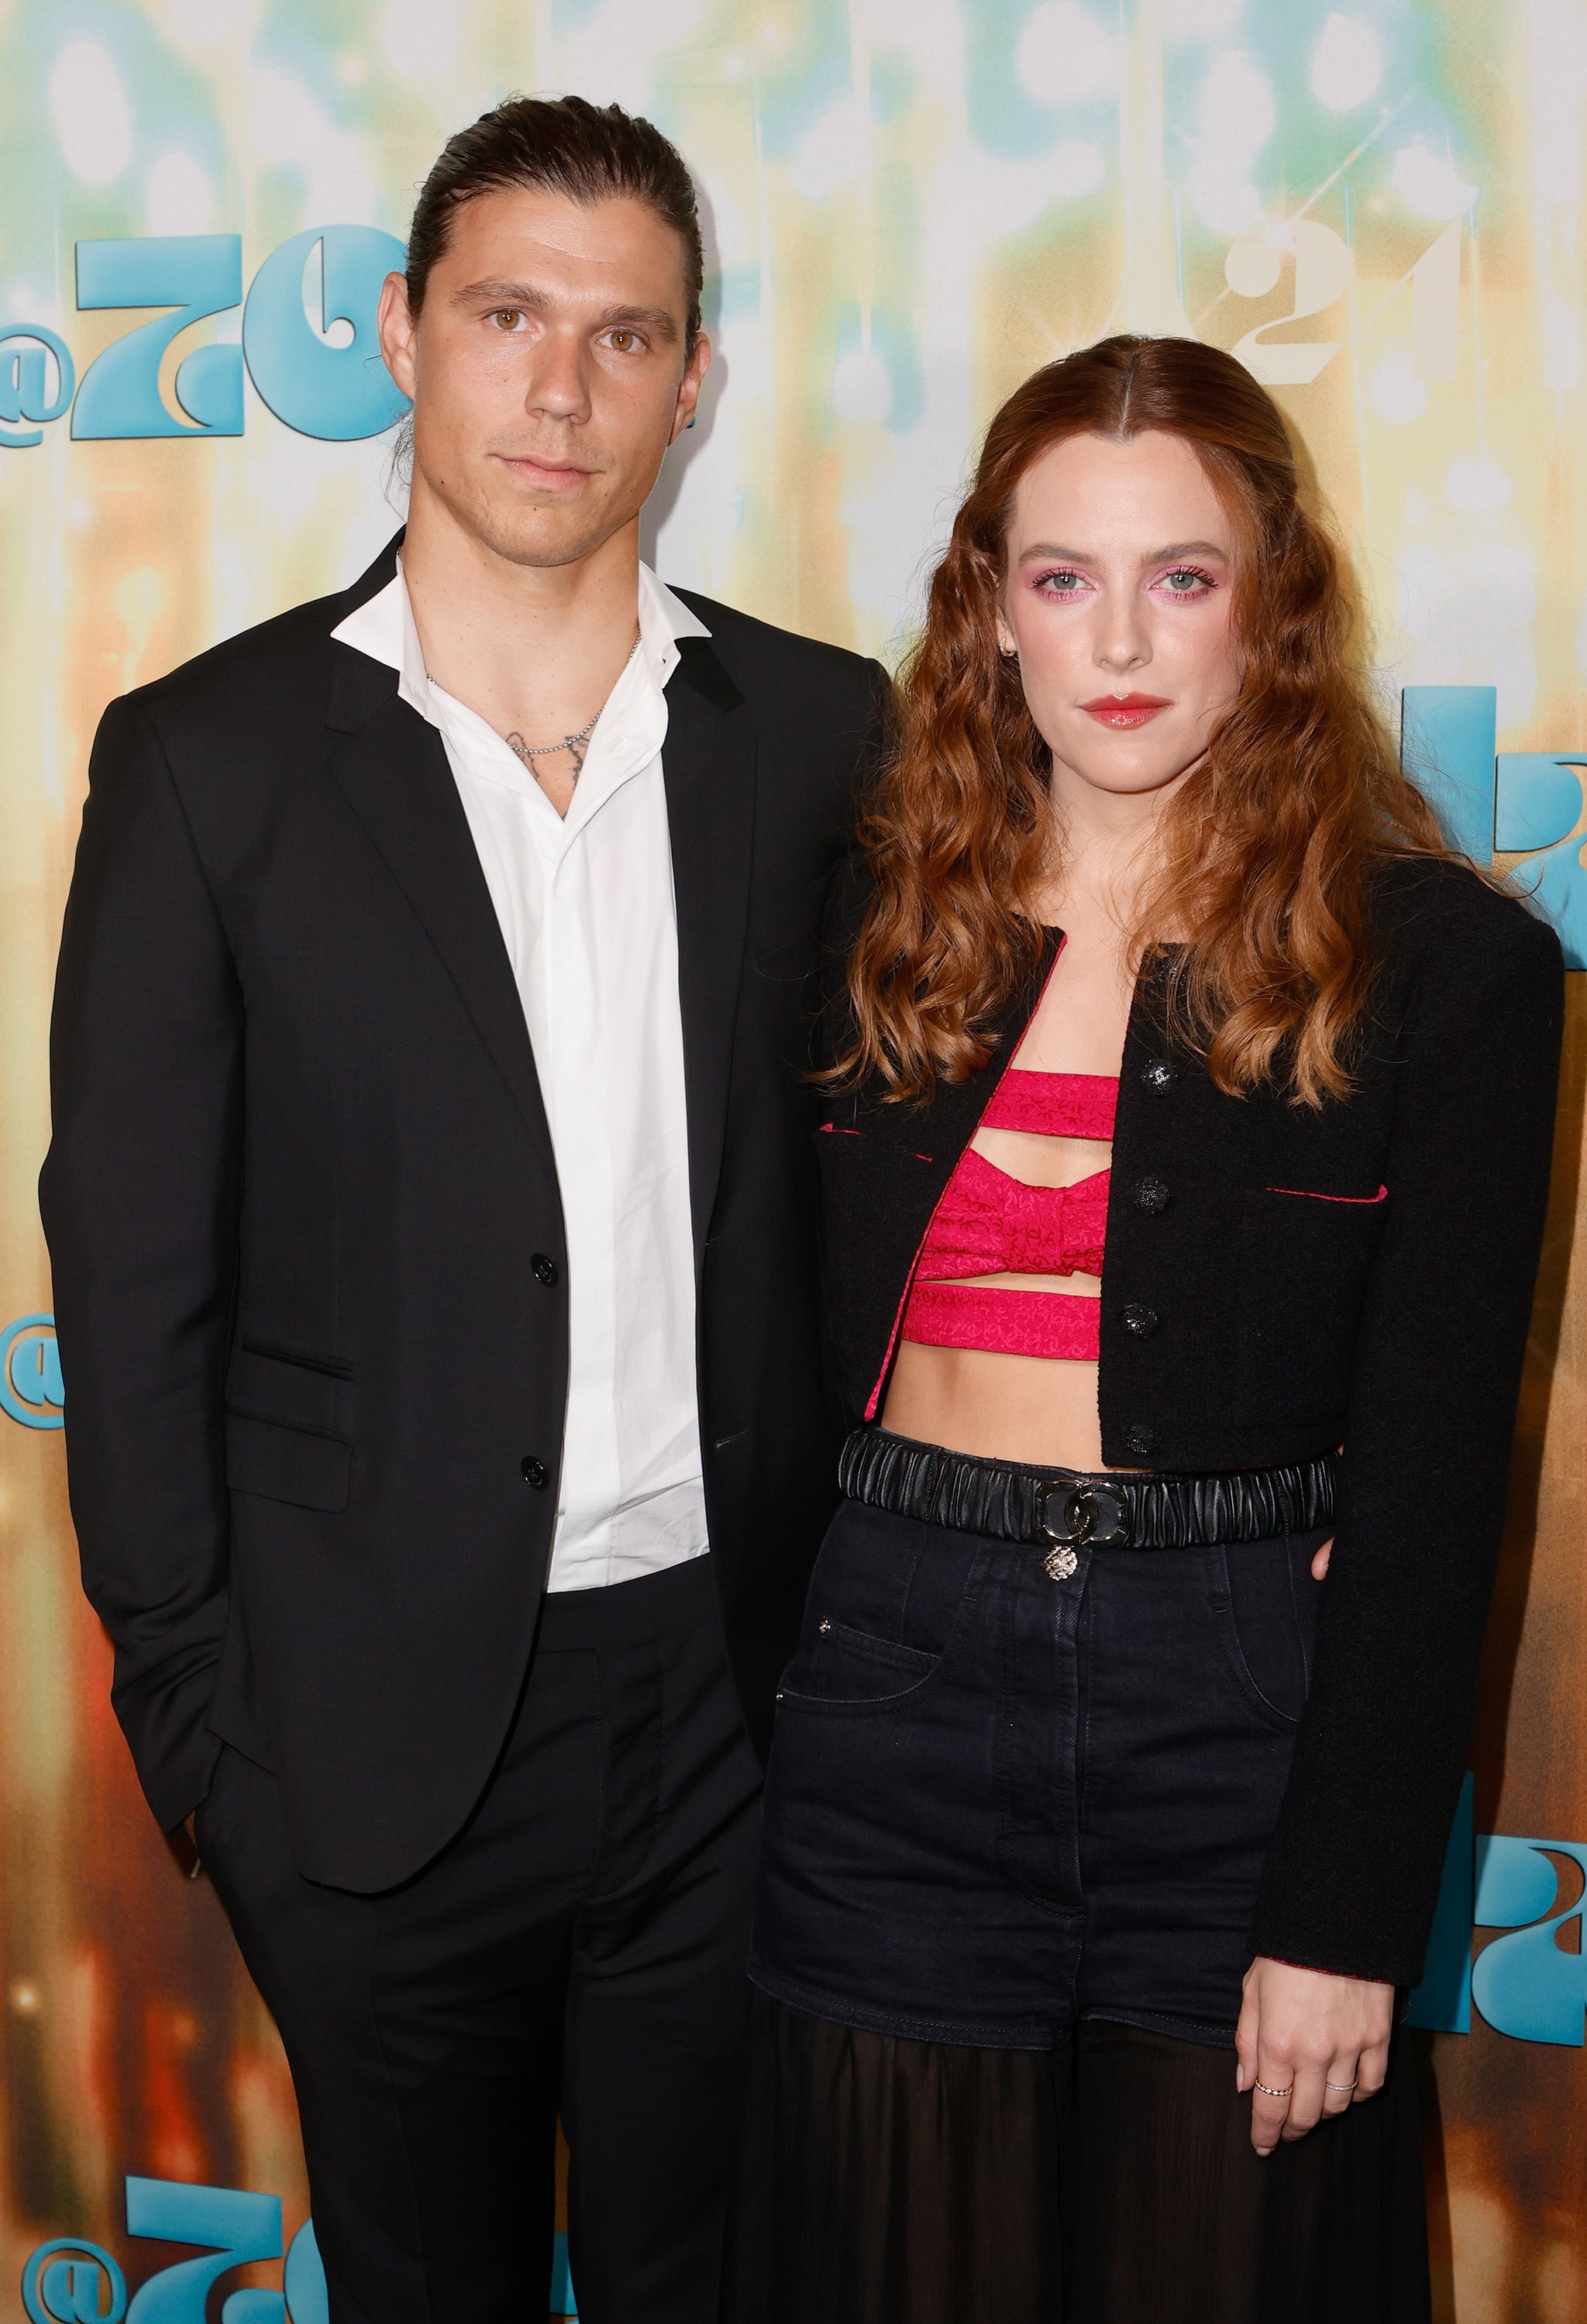 LOS ANGELES, CALIFORNIA - JUNE 29: Ben Smith-Petersen and Riley Keough attend Los Angeles special screening 